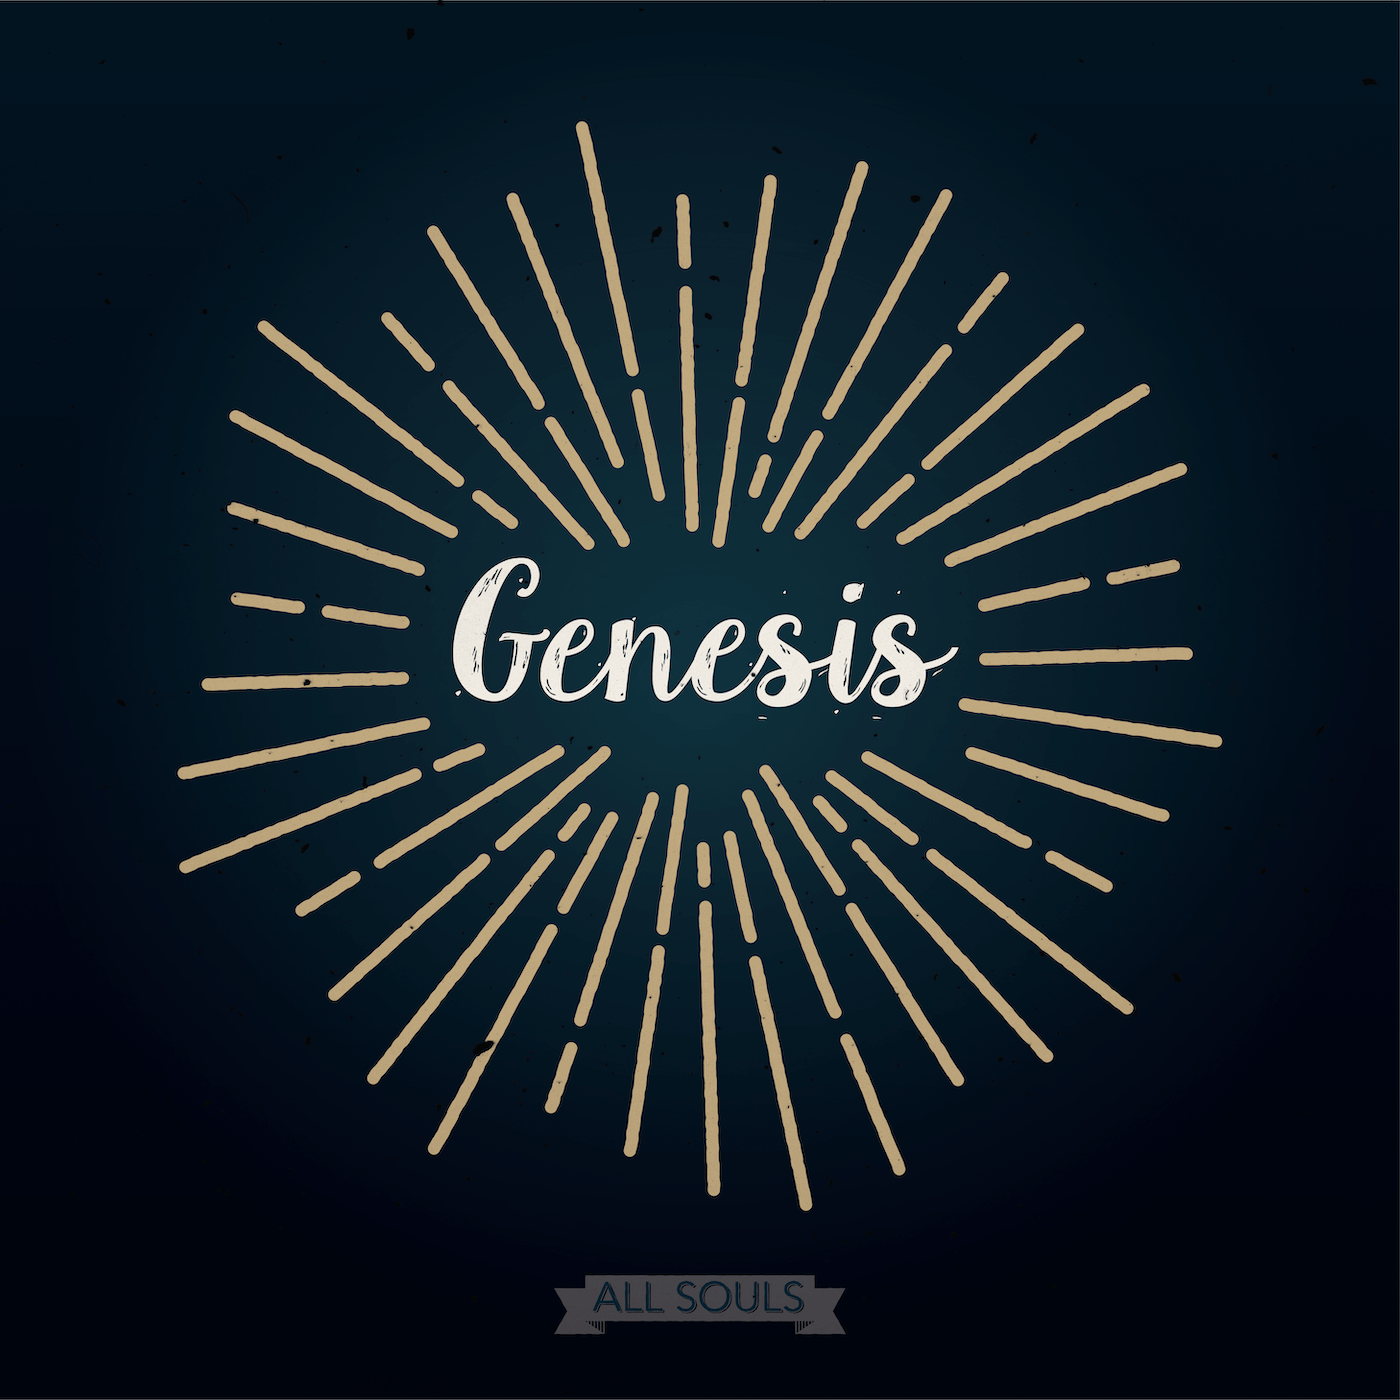 the title Genesis with radiant lines